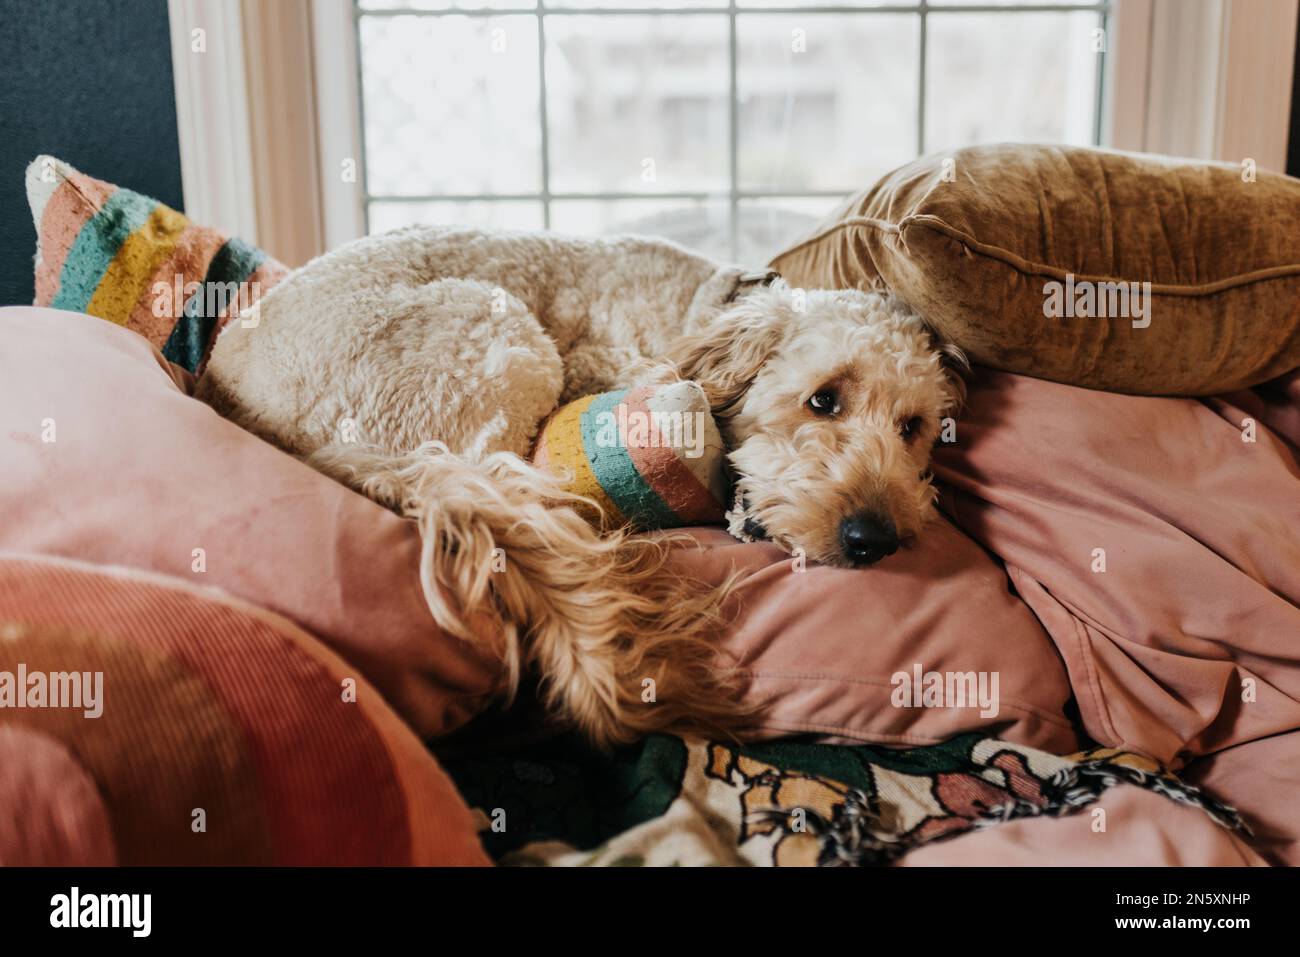 Goodendoodle lays curled up on pile of pillows on pink couch Stock Photo